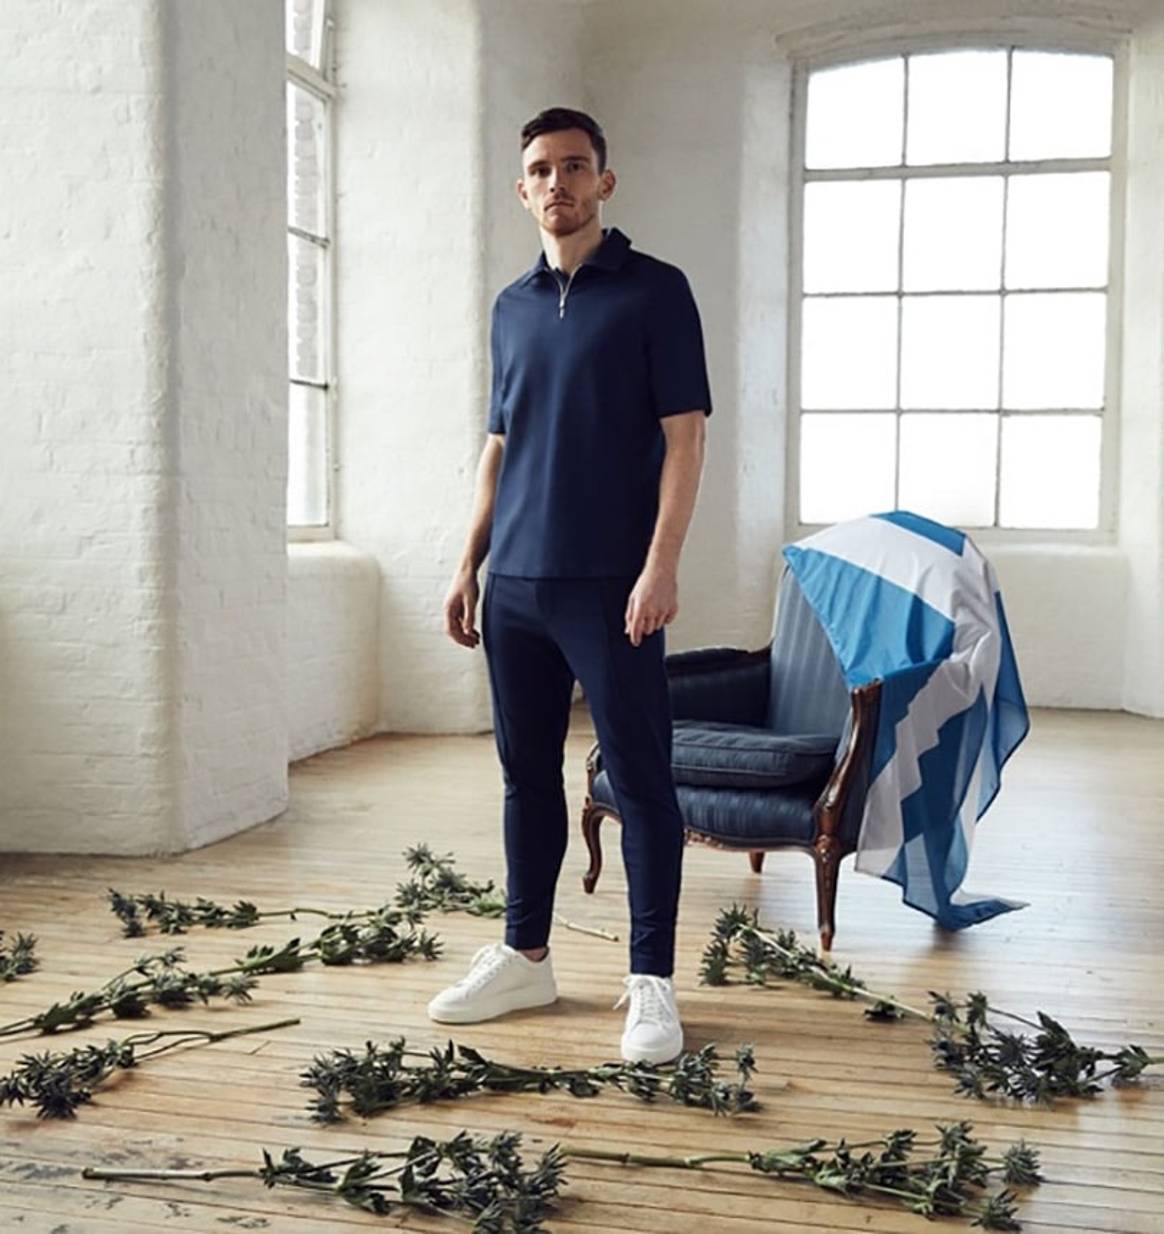 Andy Robertson becomes official ambassador for new luxury men’s fashion brand Royle Eleven